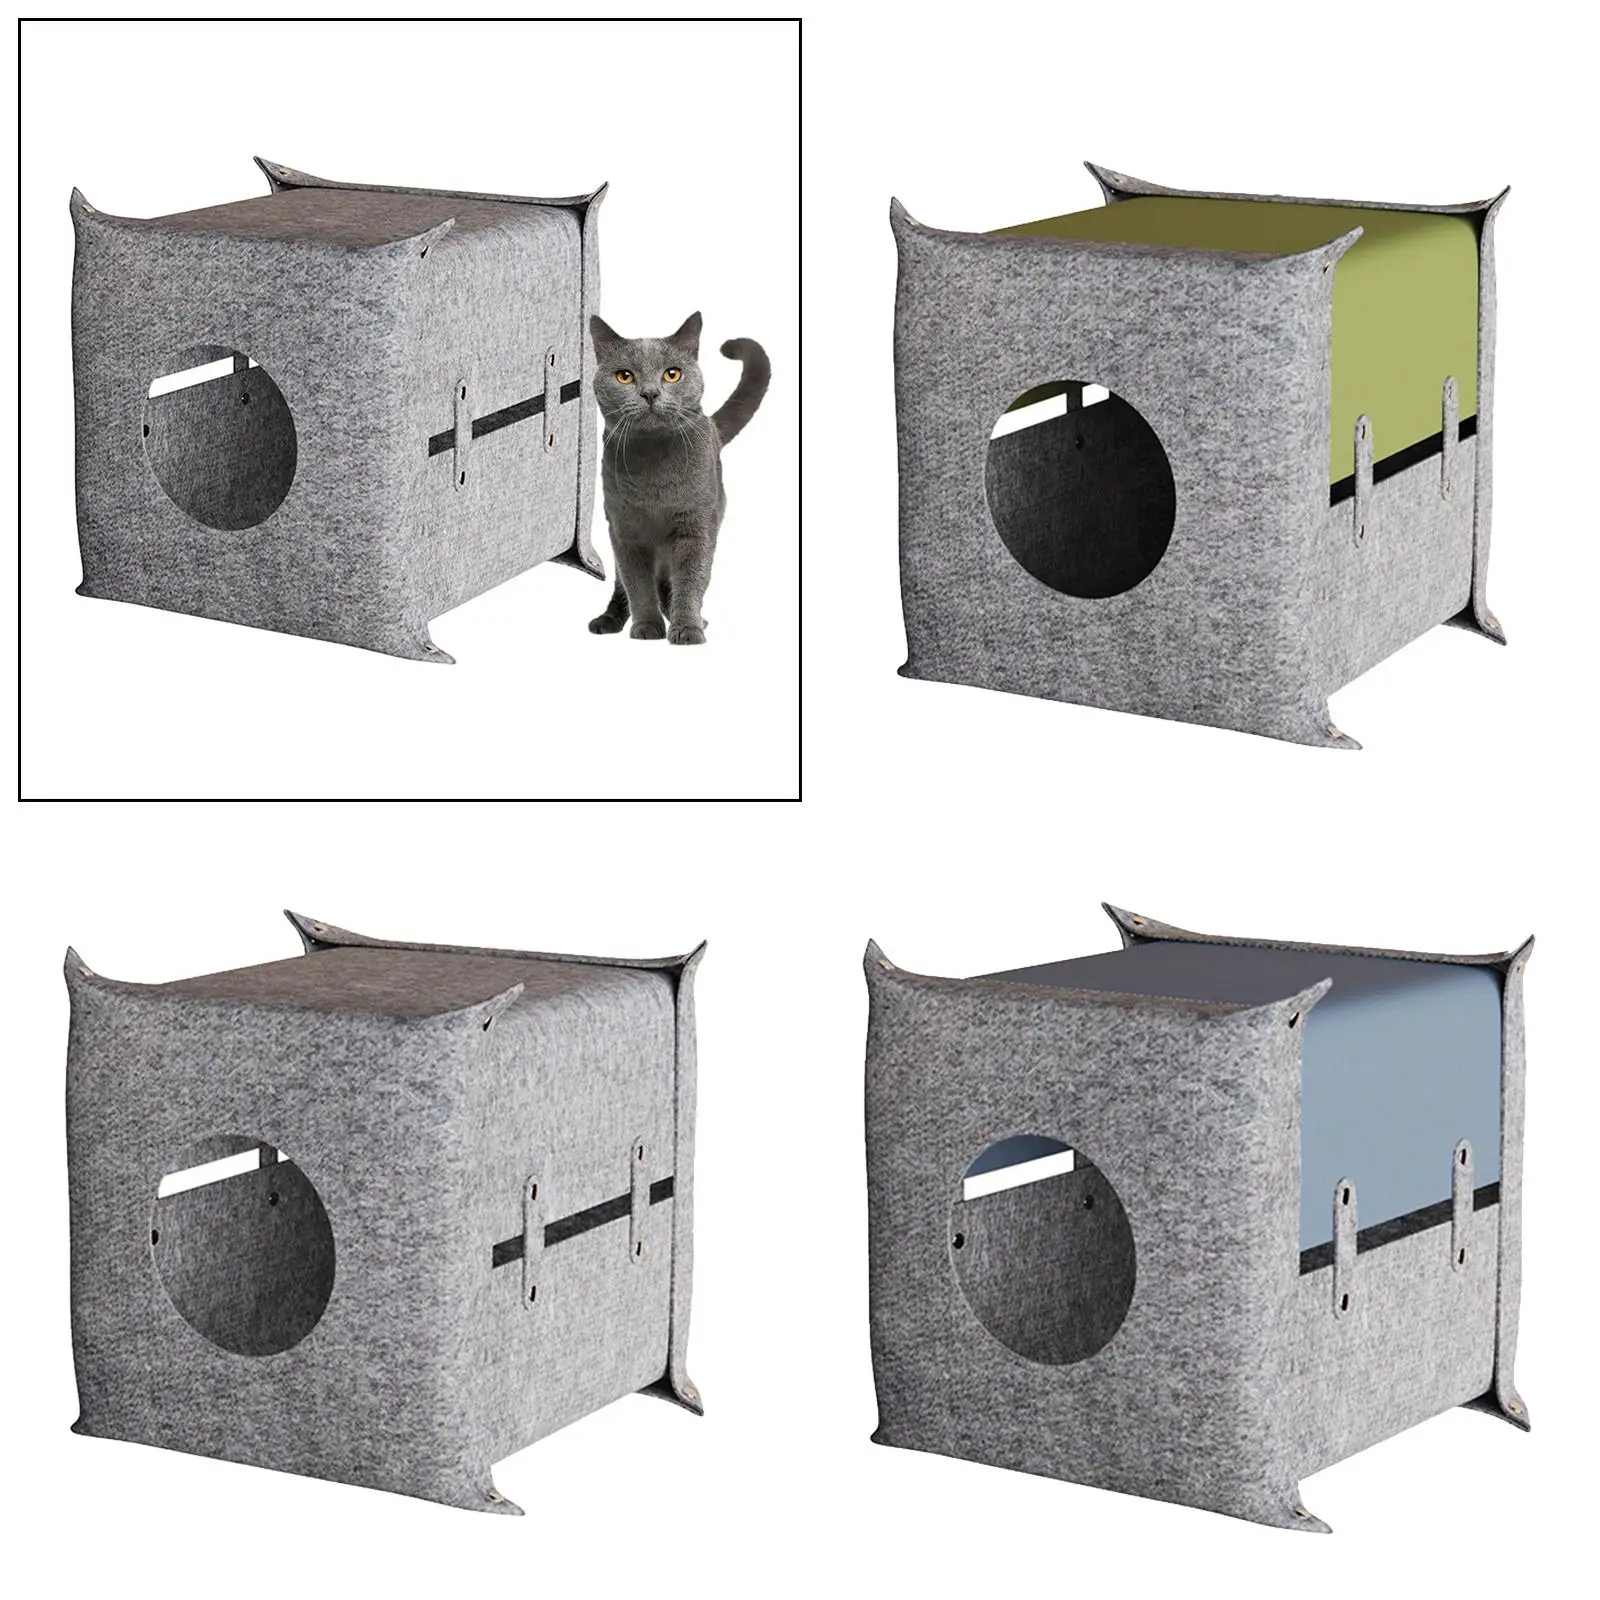 Felt Cats Cave Sleeping Bed for Indoor Cats, Lounger Playhouse Tent